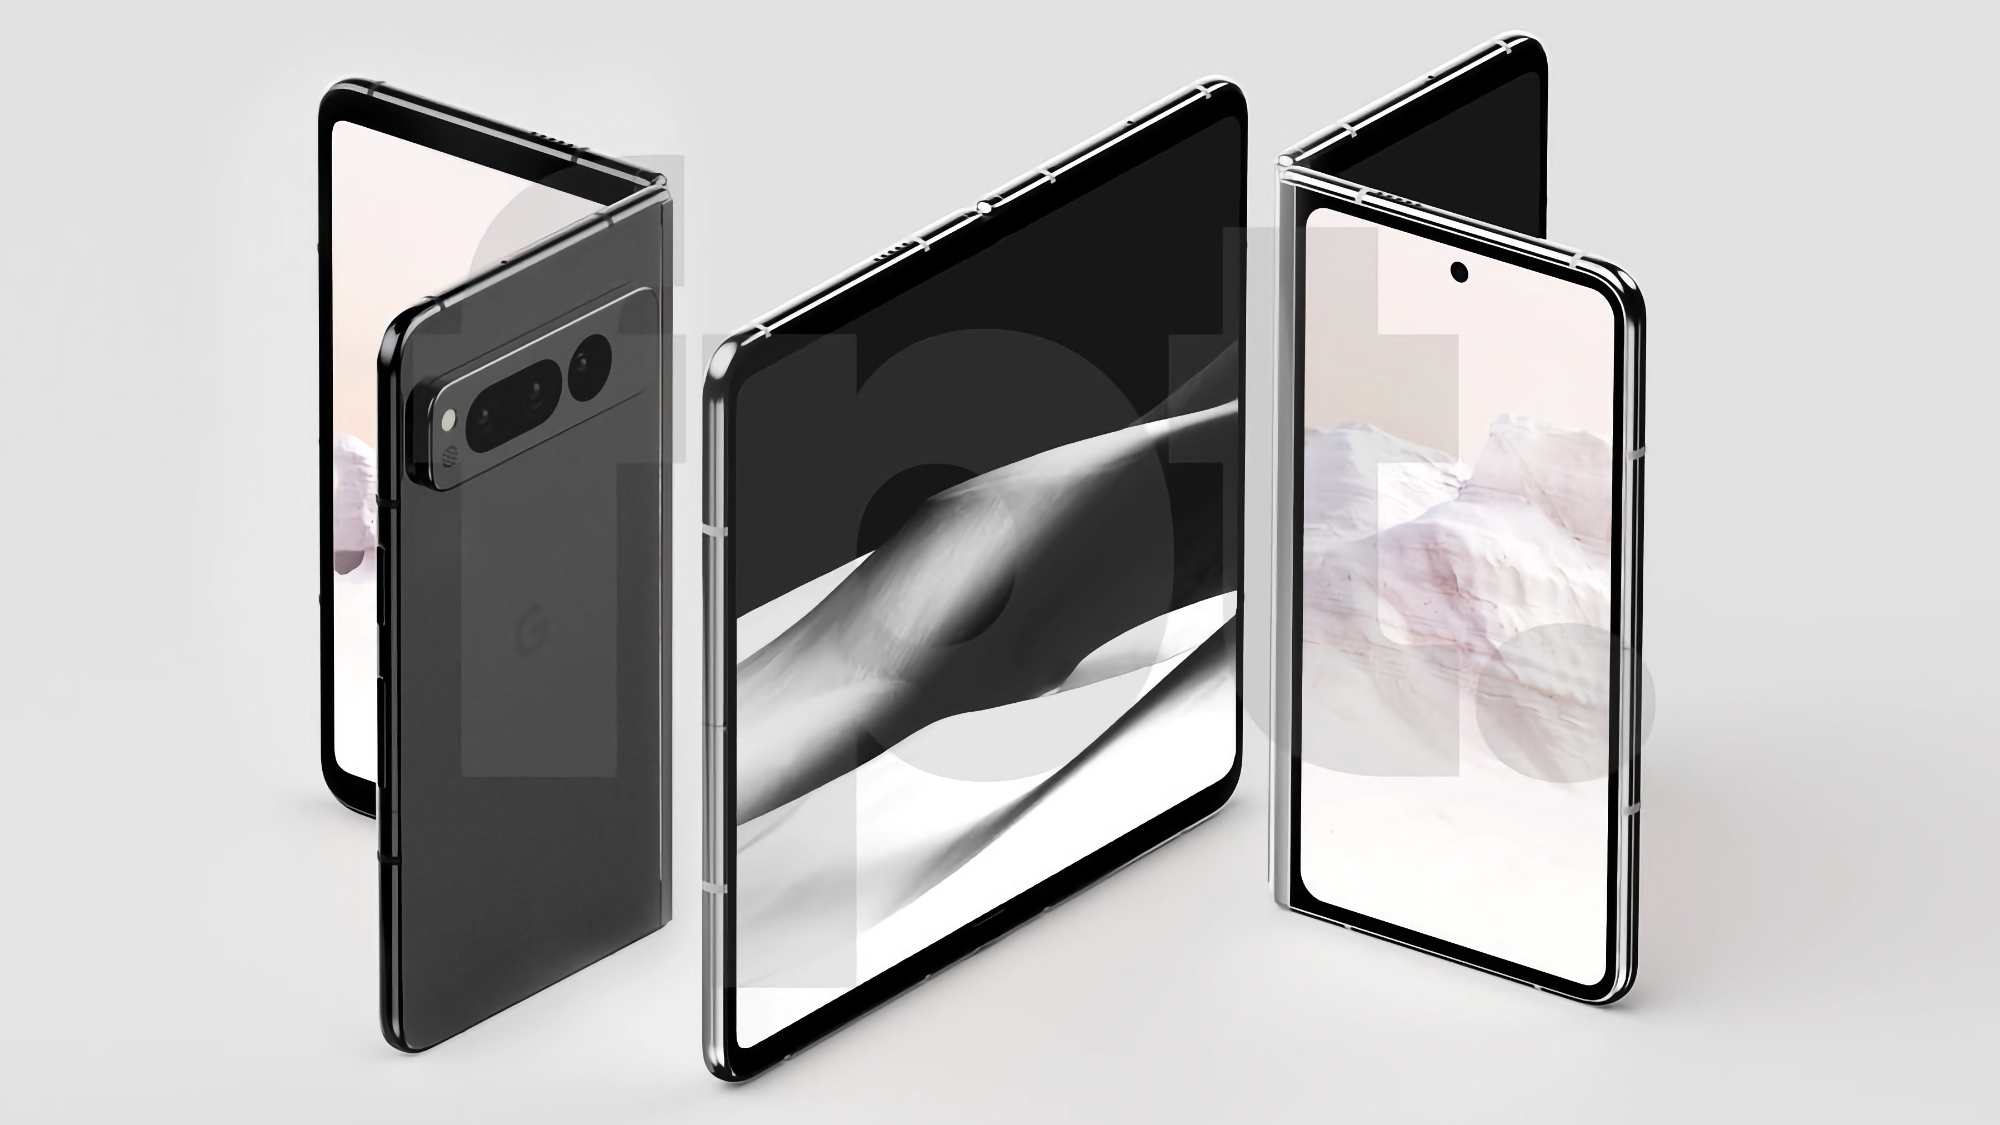 Insider reveals when Google will unveil and sell foldable Pixel Fold smartphone